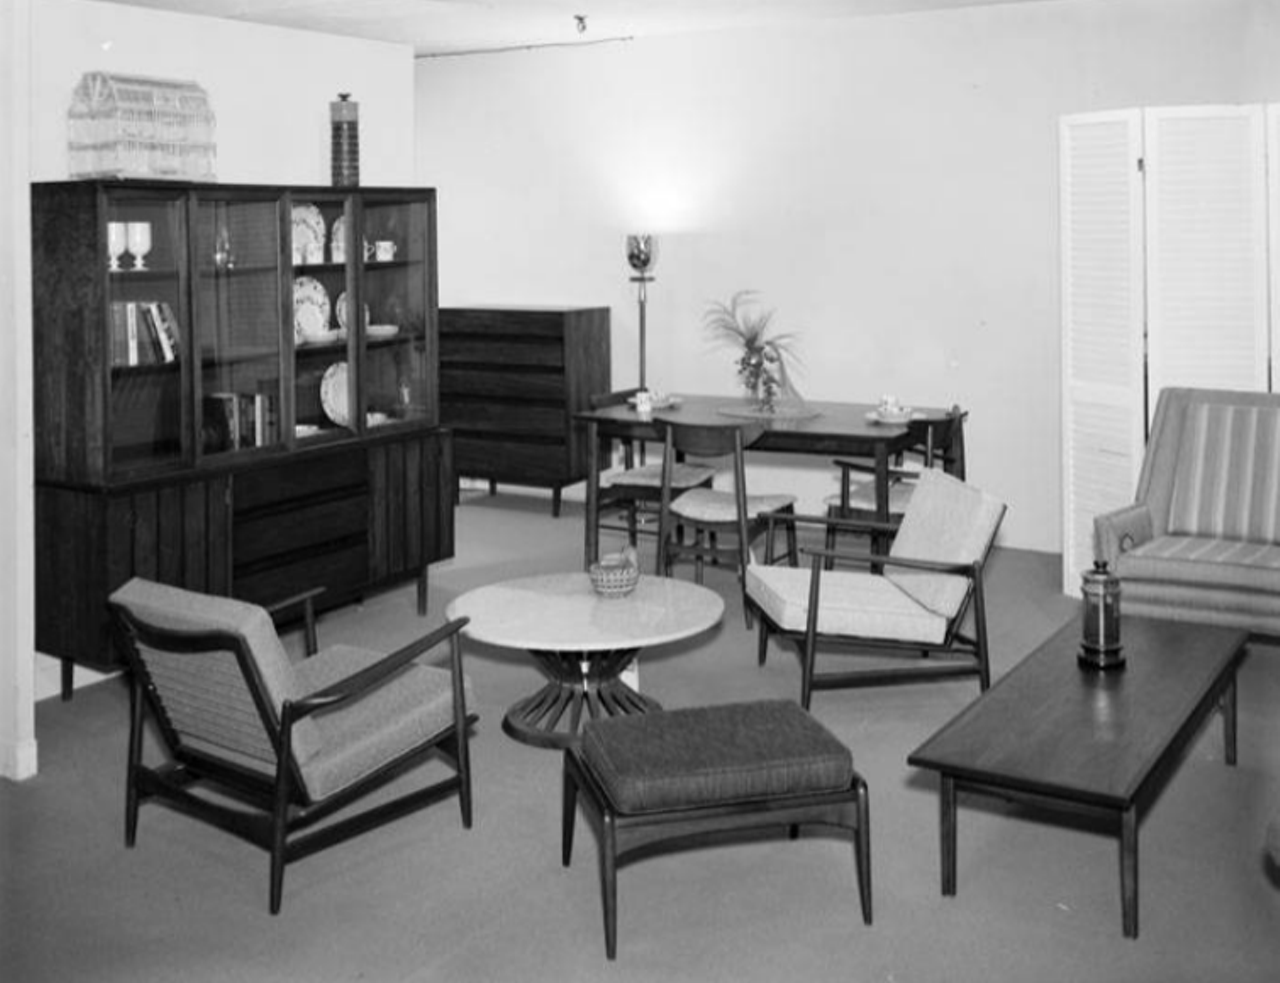 Does anyone still have their furniture pieces from Joske's?